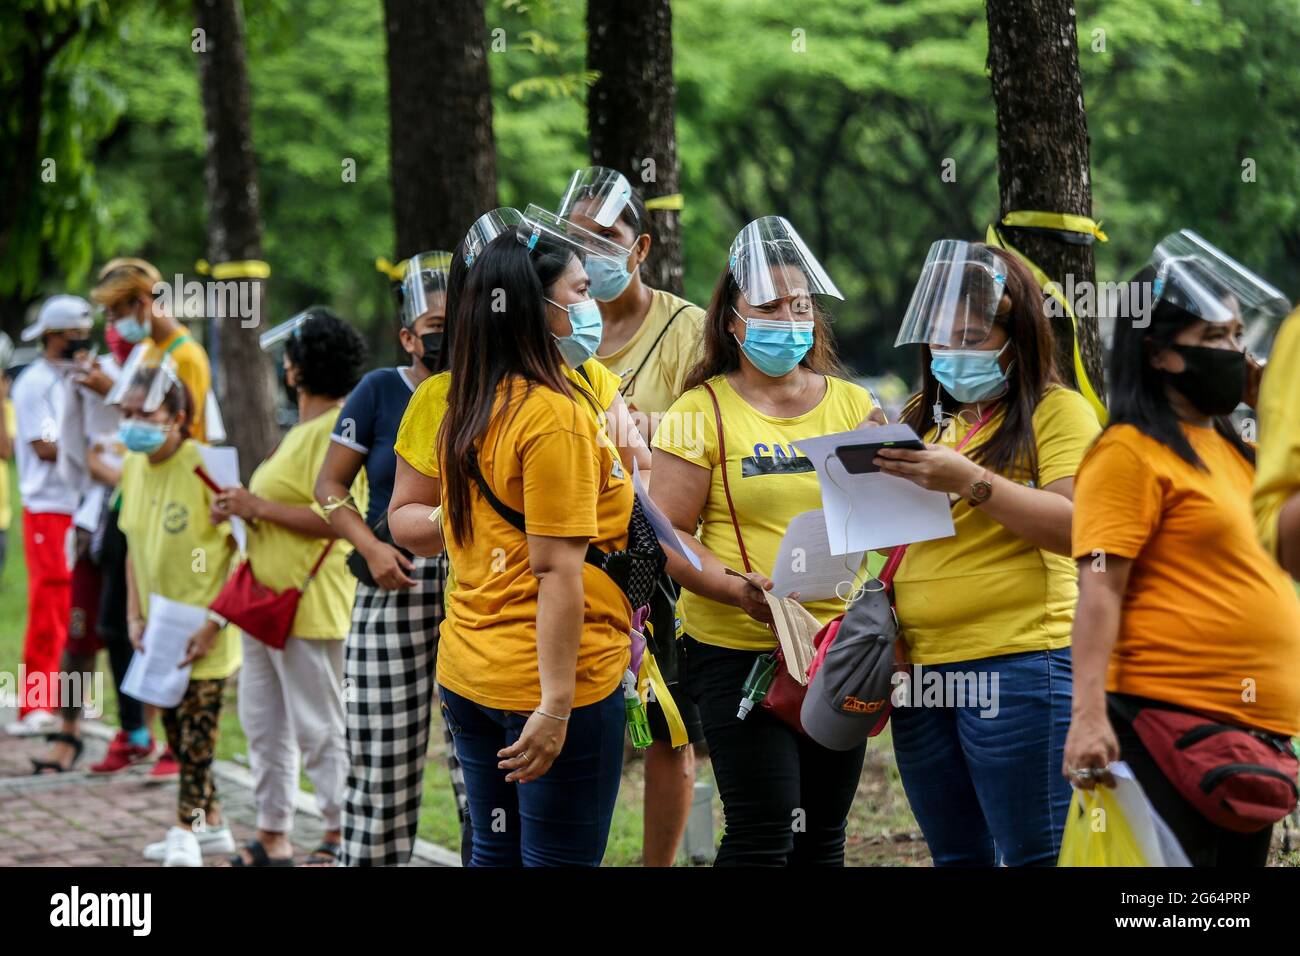 Supporters of former President Benigno Aquino III queue for a public viewing during his wake at the Ateneo Church of Gesu in Quezon City, Metro Manila, Philippines. Stock Photo